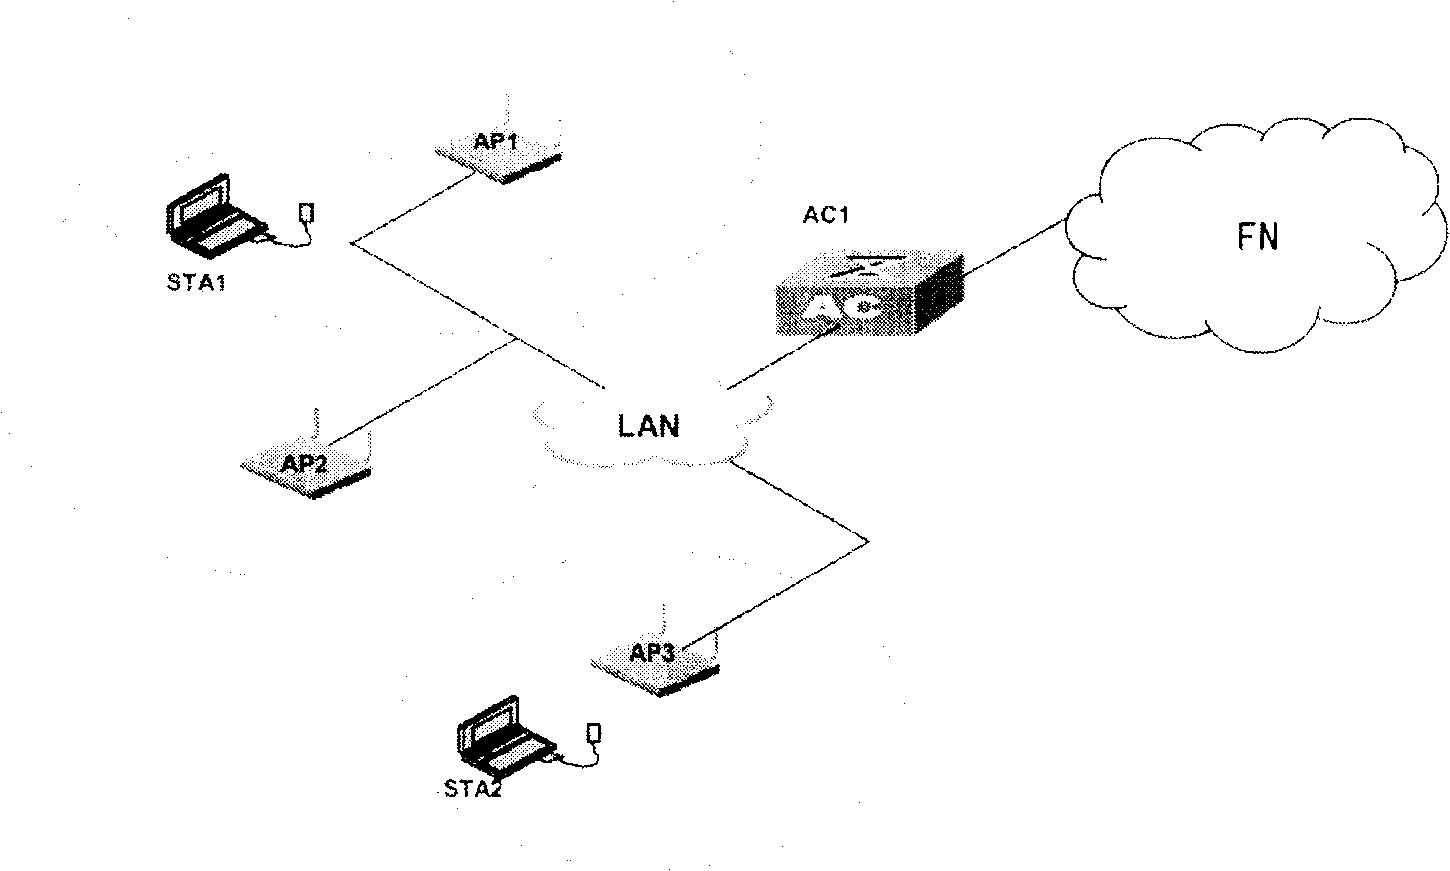 Method and system for expanding 802.11 radio local network